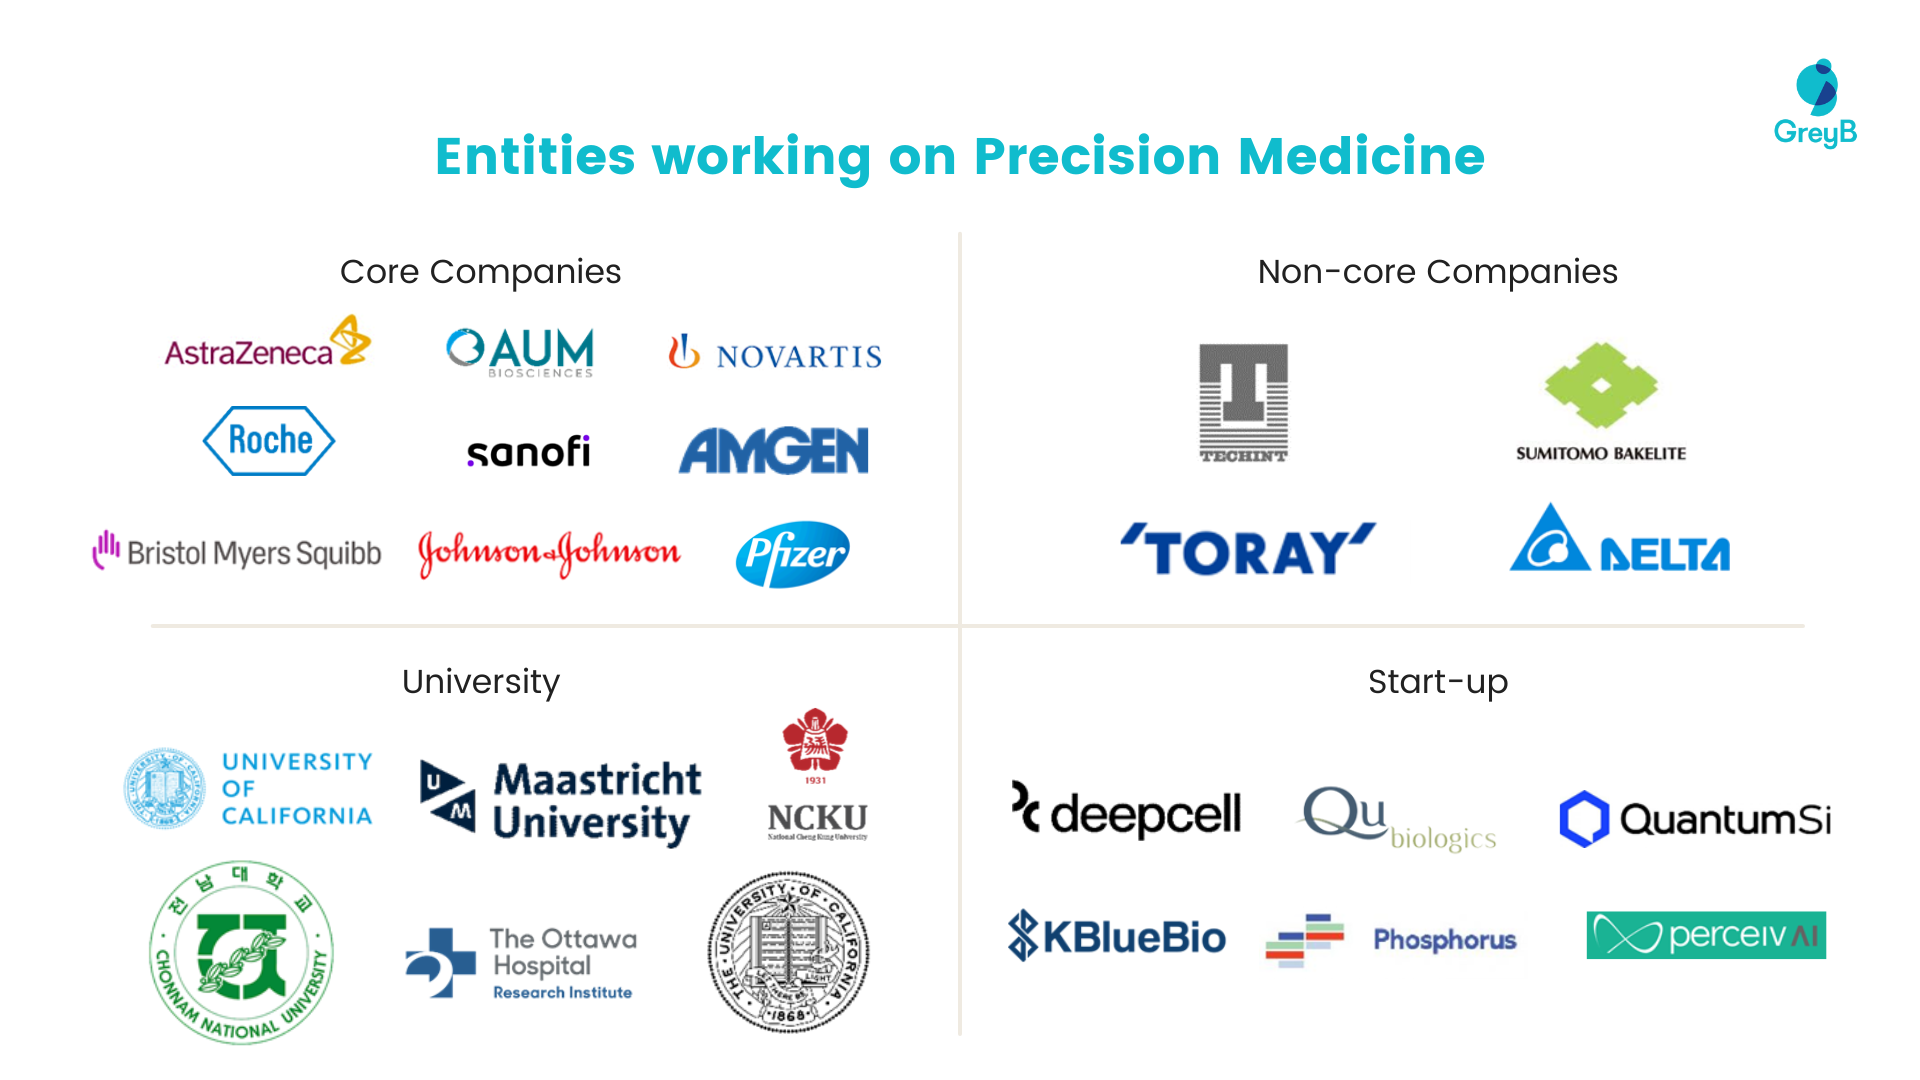 Entities working on Precision Medicine